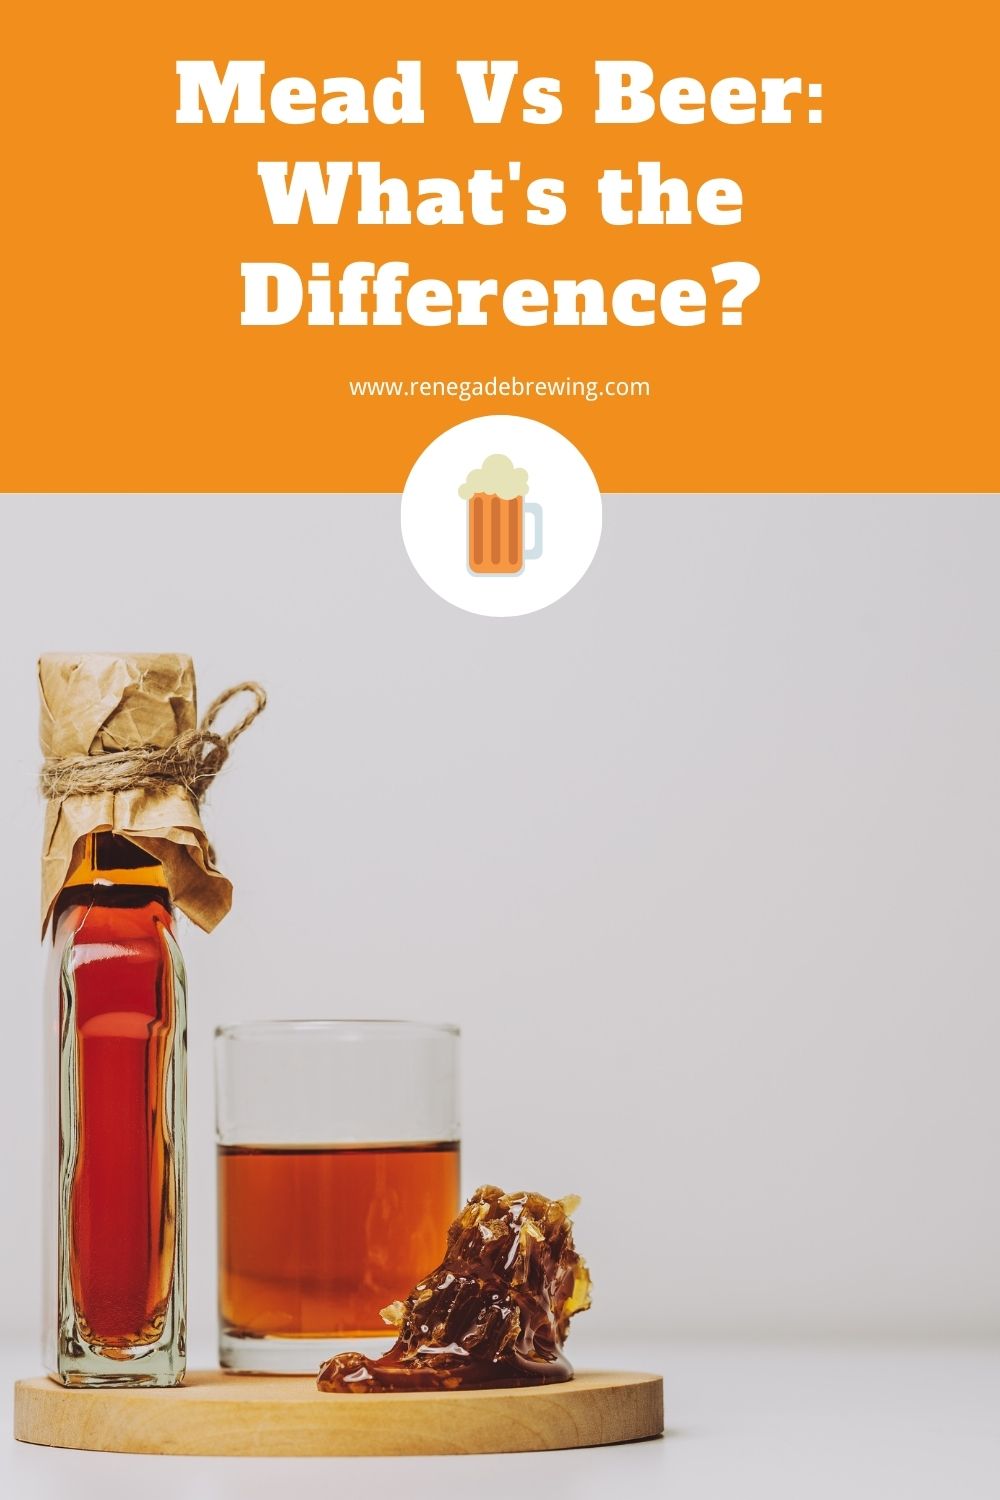 Mead Vs Beer What's the Difference 2